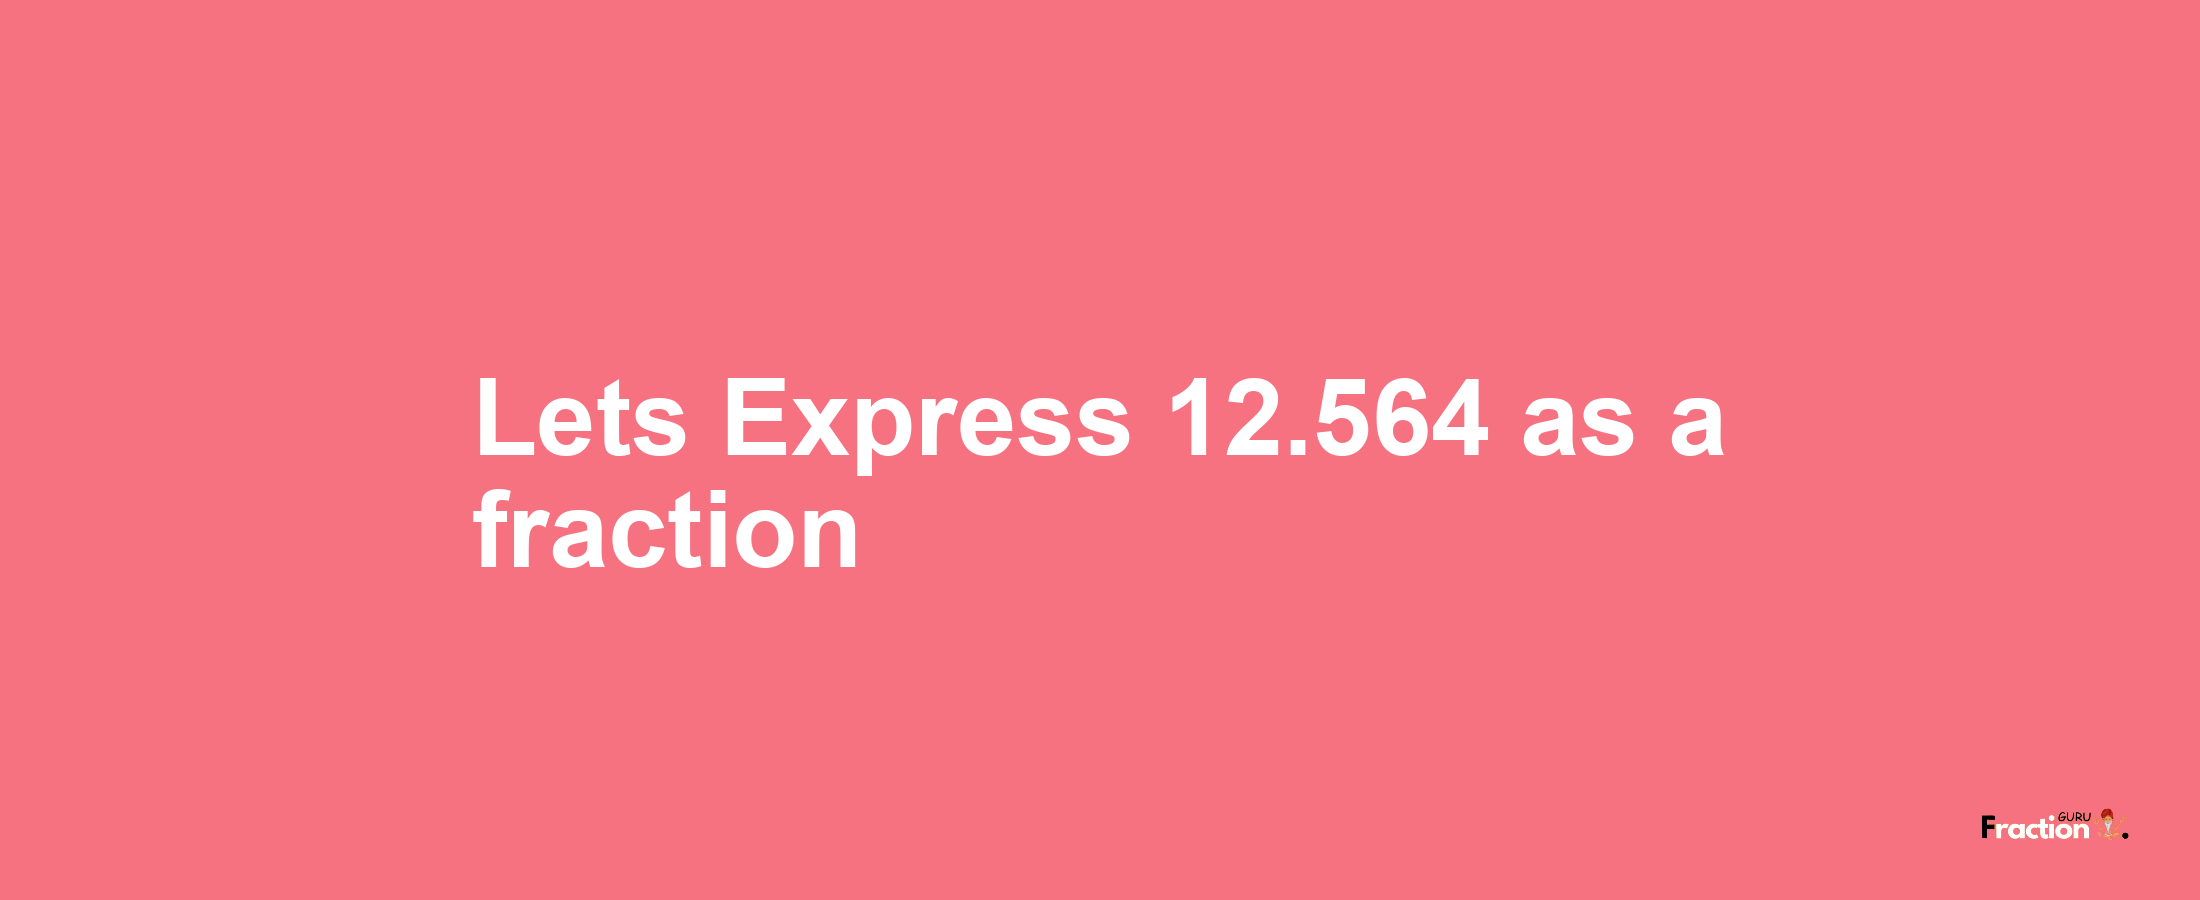 Lets Express 12.564 as afraction